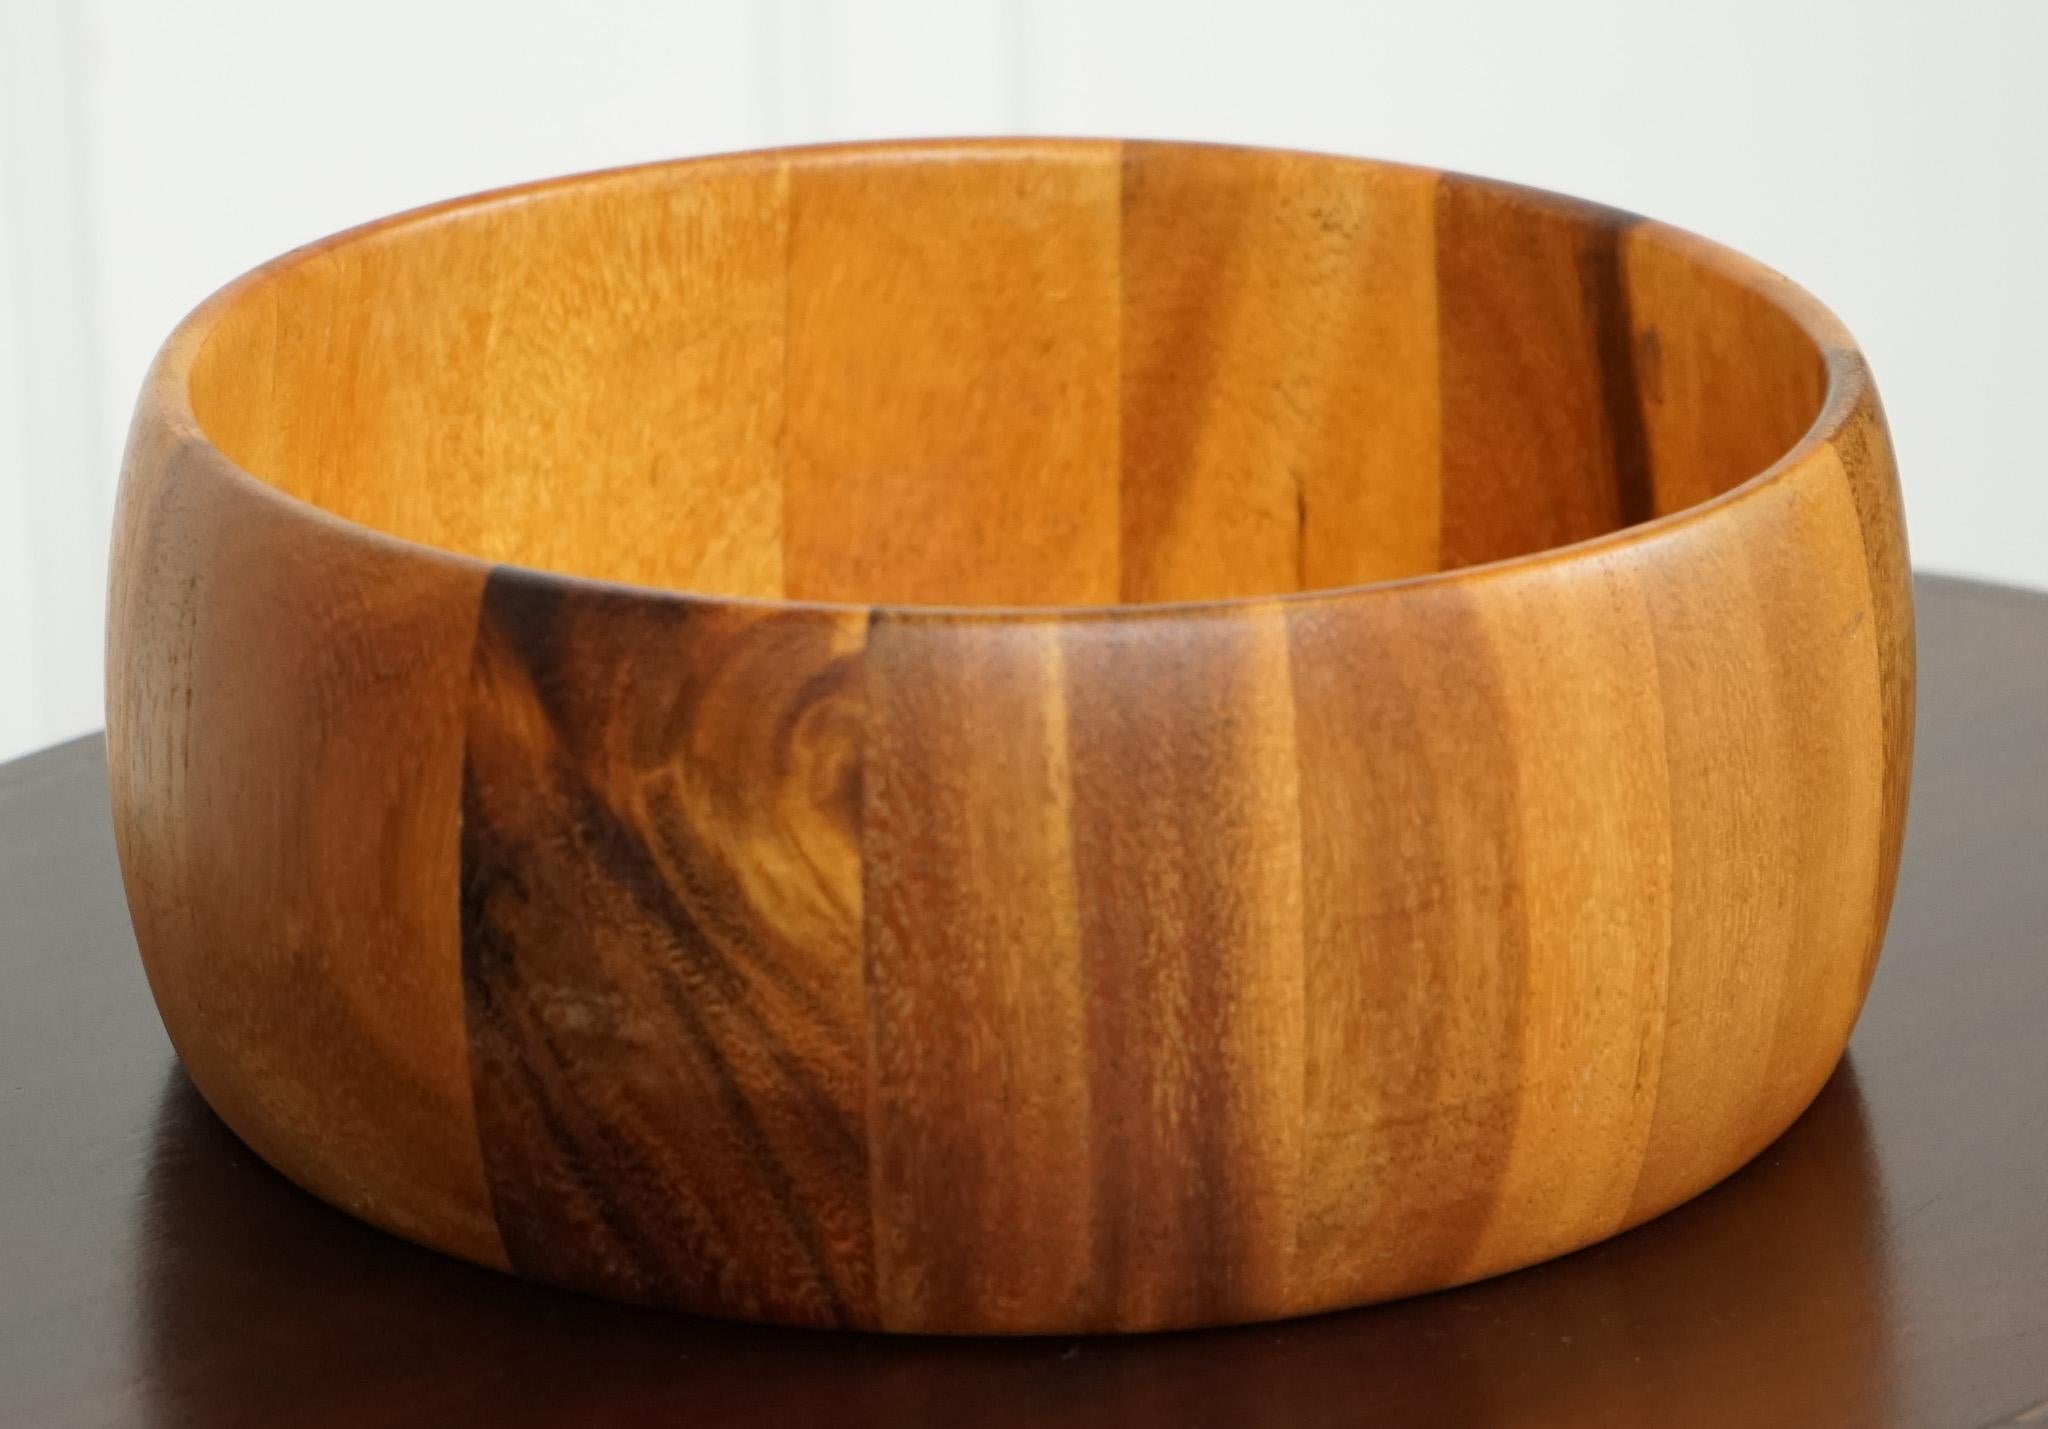 

We are delighted to offer for sale this Acacia Curved Fruit or Salad Bowl.

Please carefully examine the pictures to see the condition before purchasing, as they form part of the description. If you have any questions, please message us.